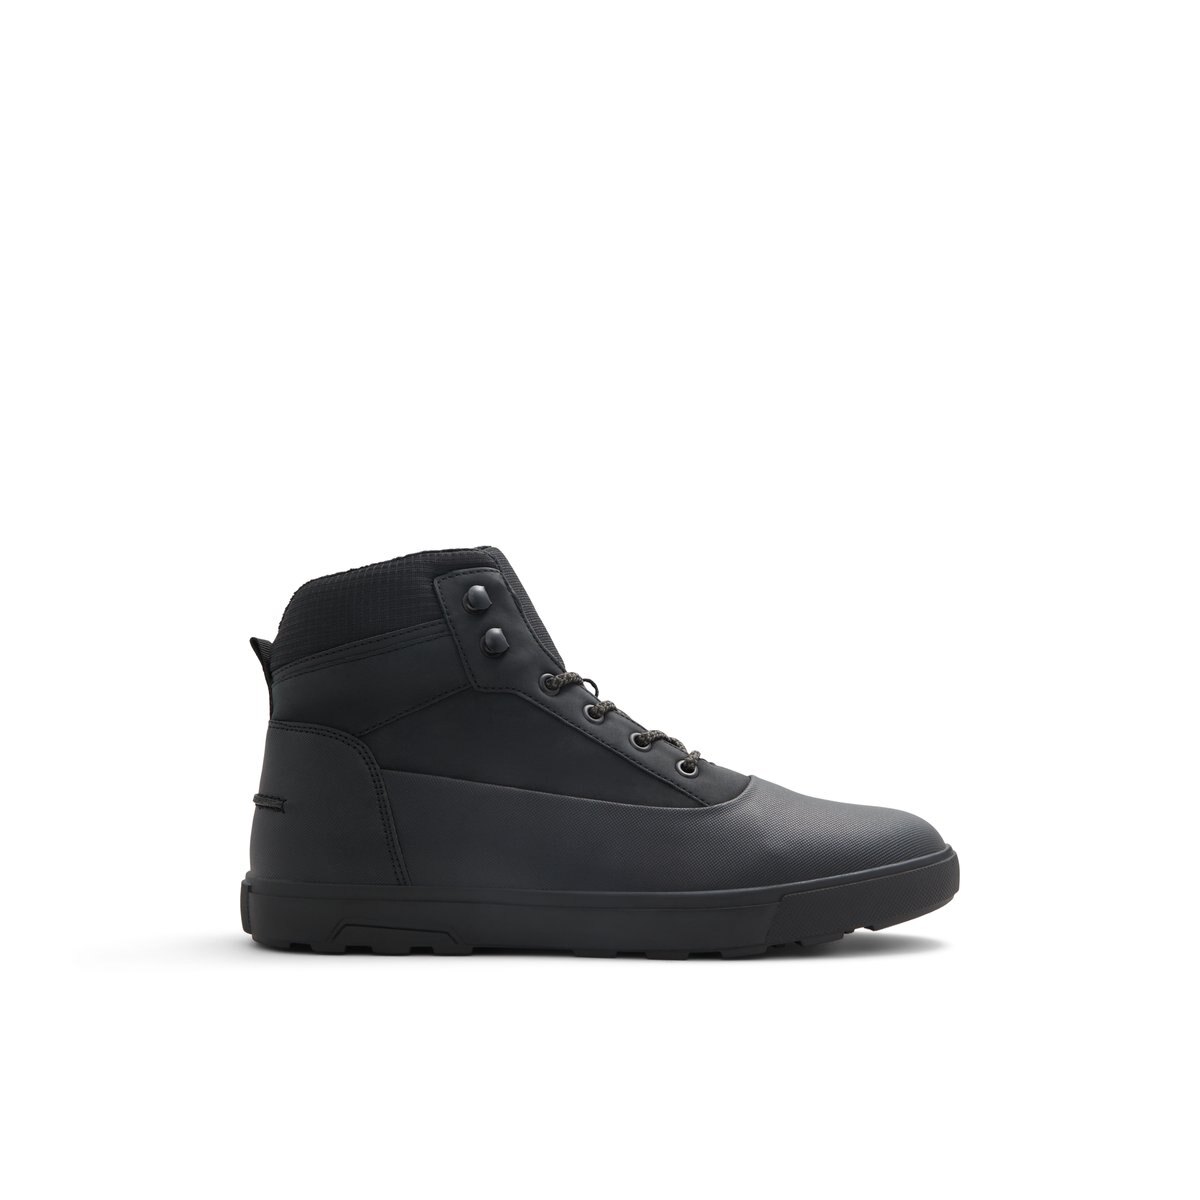 Galleras Black Men's chunky boots | Call It Spring Canada